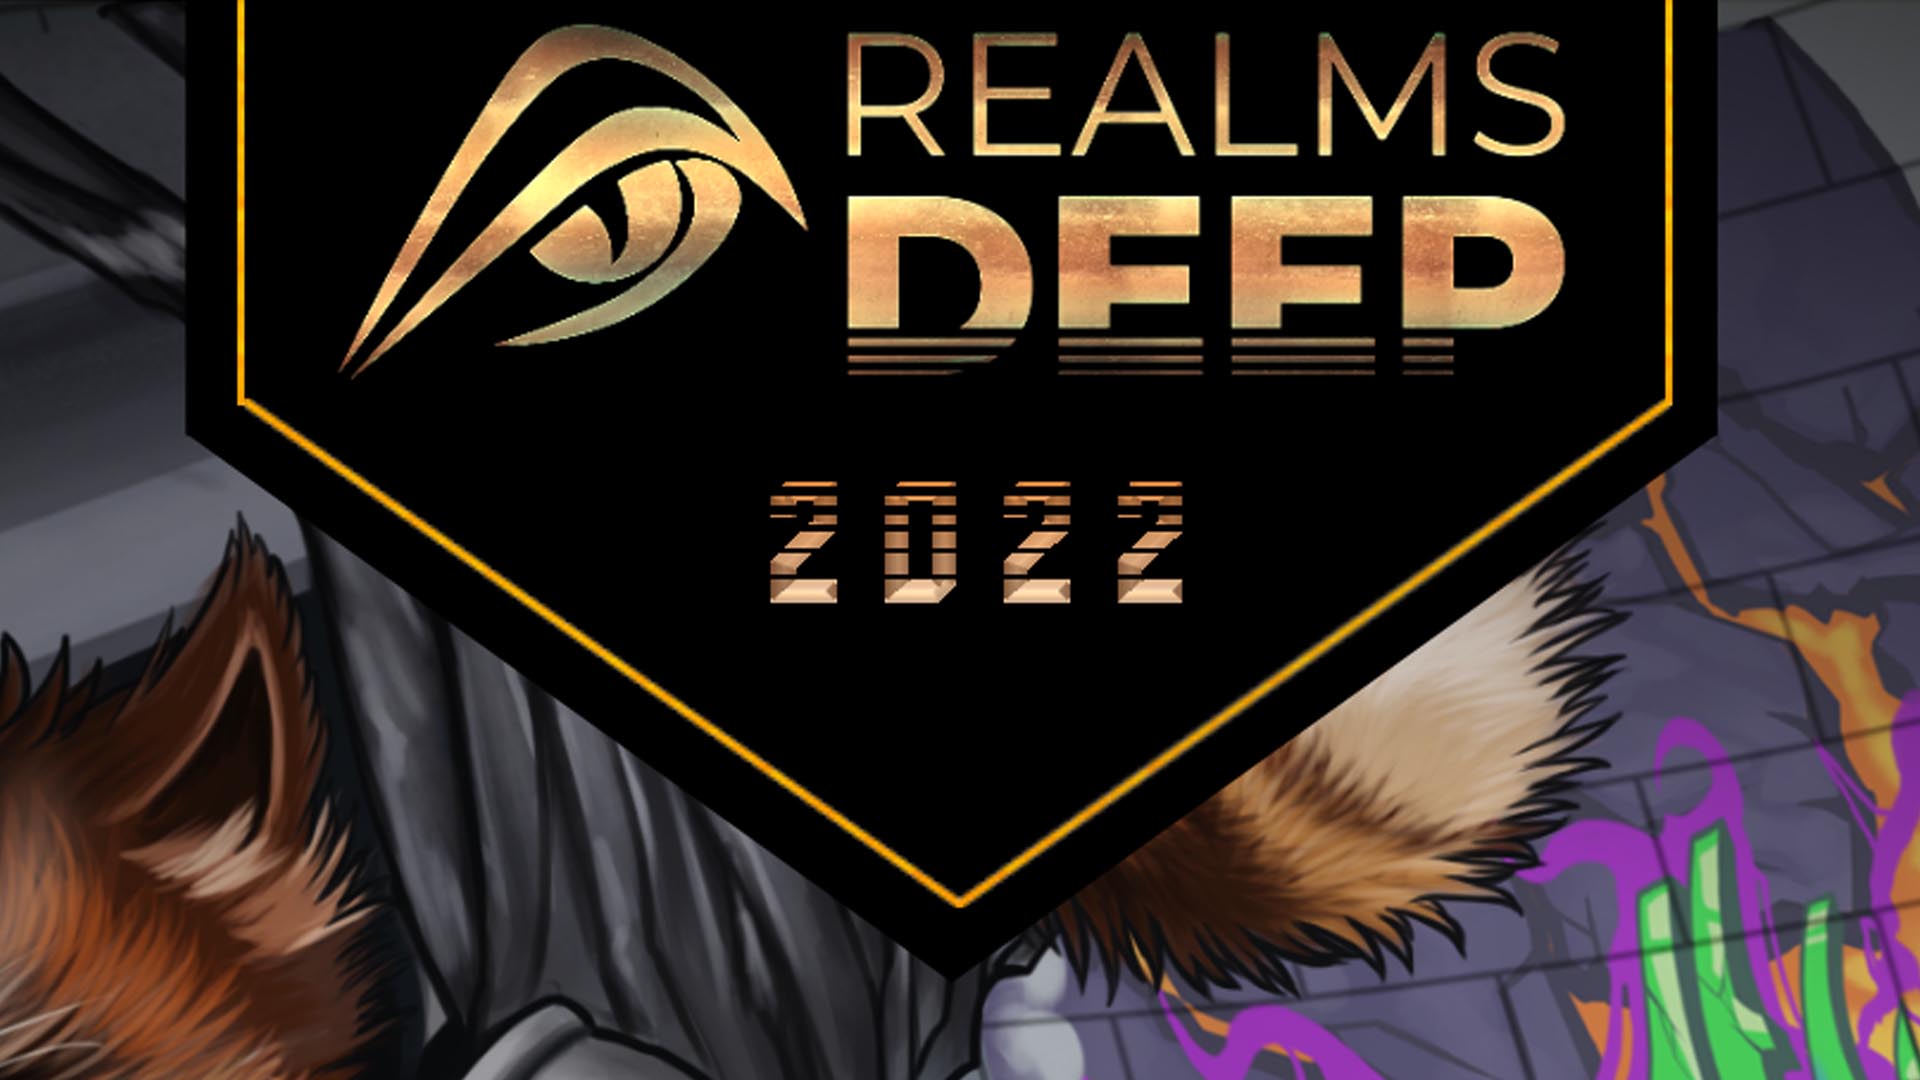 Sale on Steam: Boomer shooter on sale thanks to Realms Deep 2022